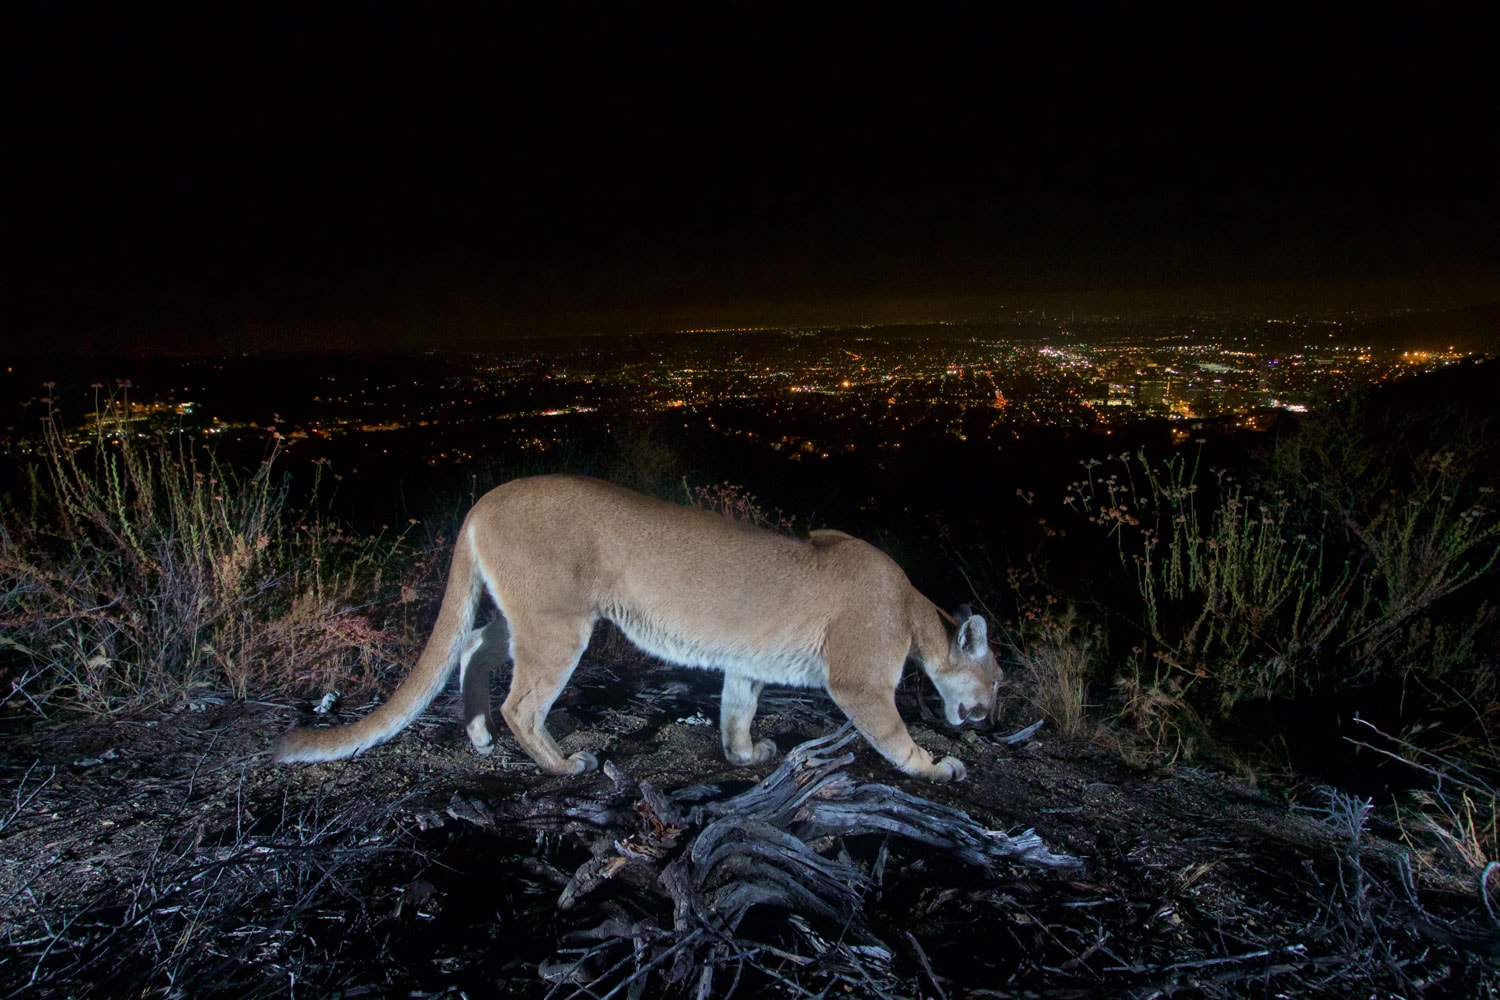 Mountain Lion at night near Los Angeles